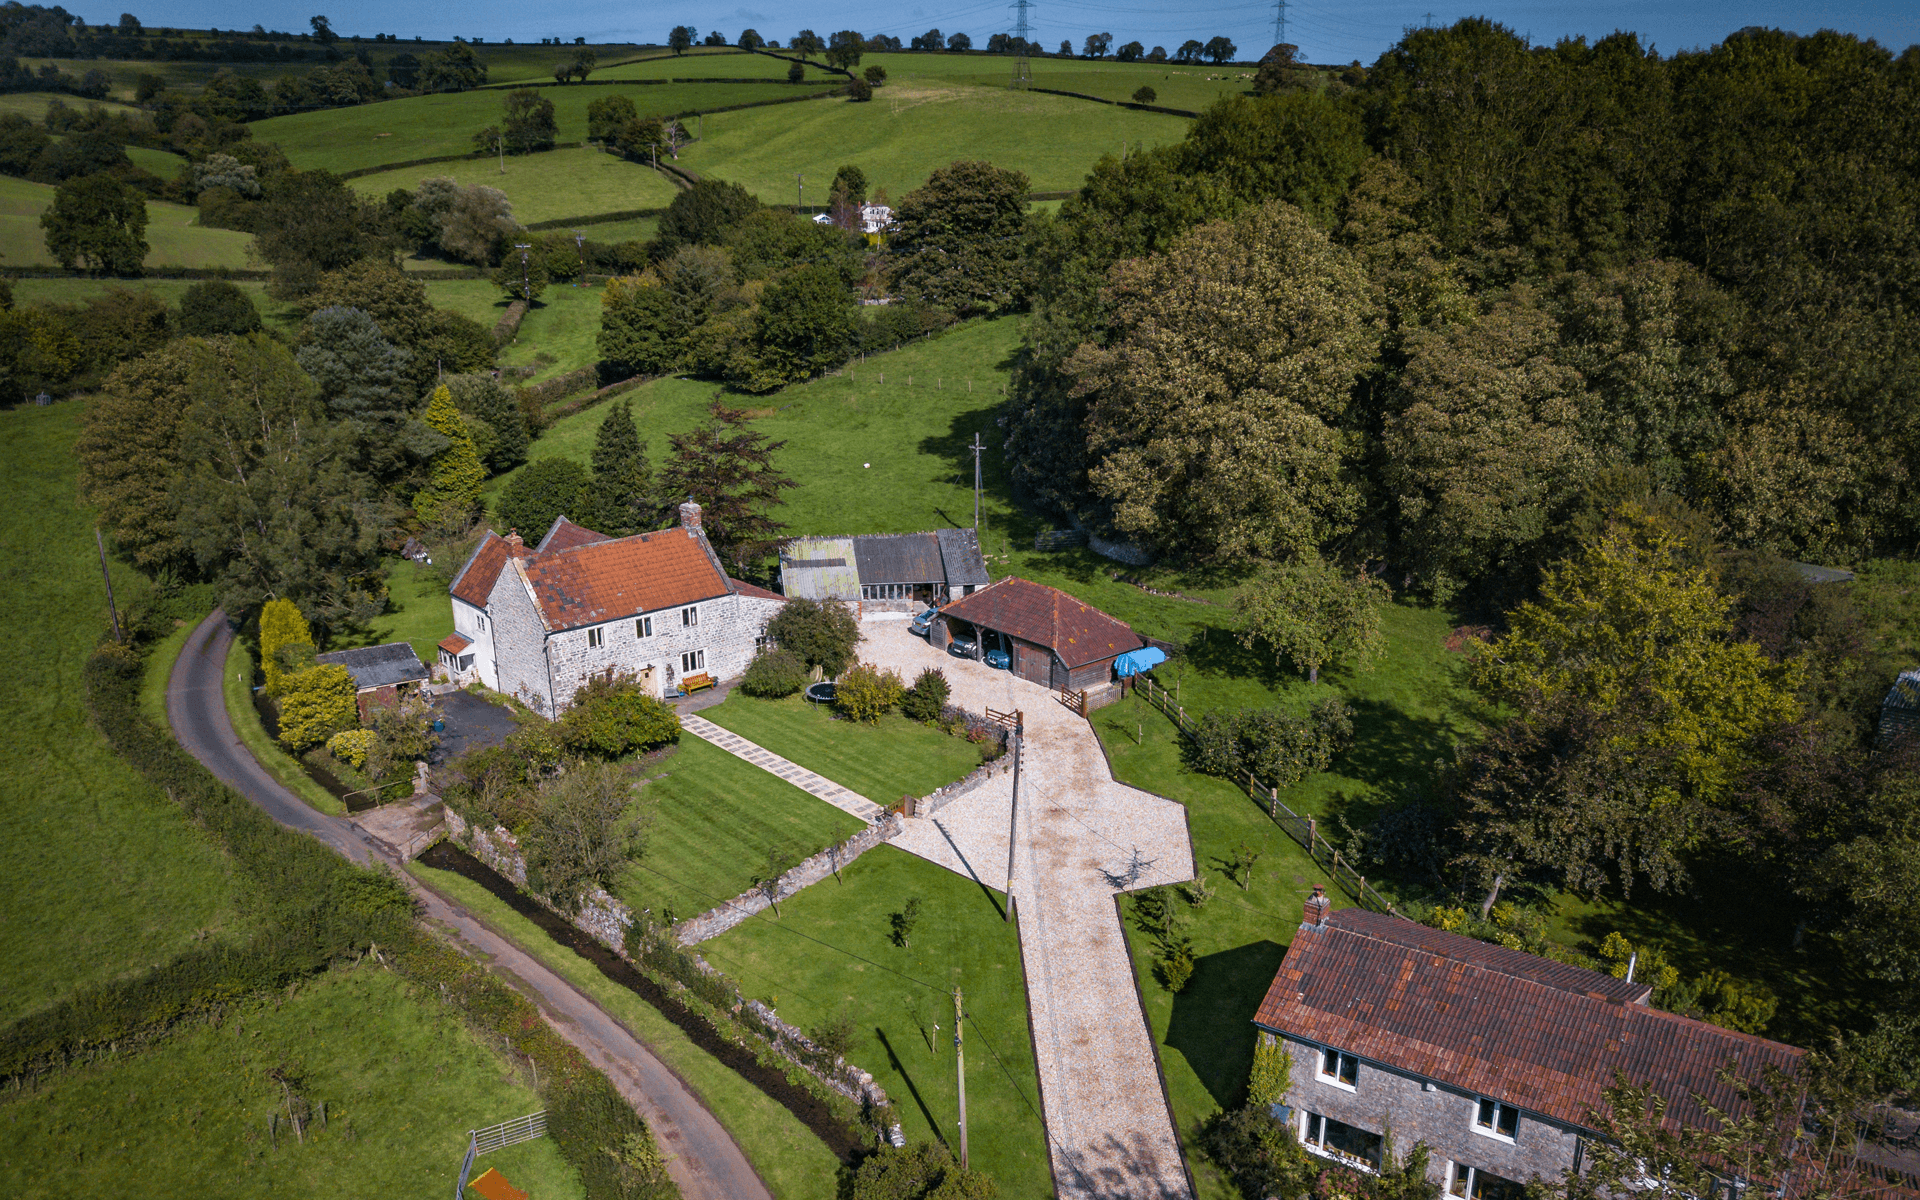 "Mavic Pro" aerial drone photo of house in Prestleigh, Shepton Mallet for estate agency